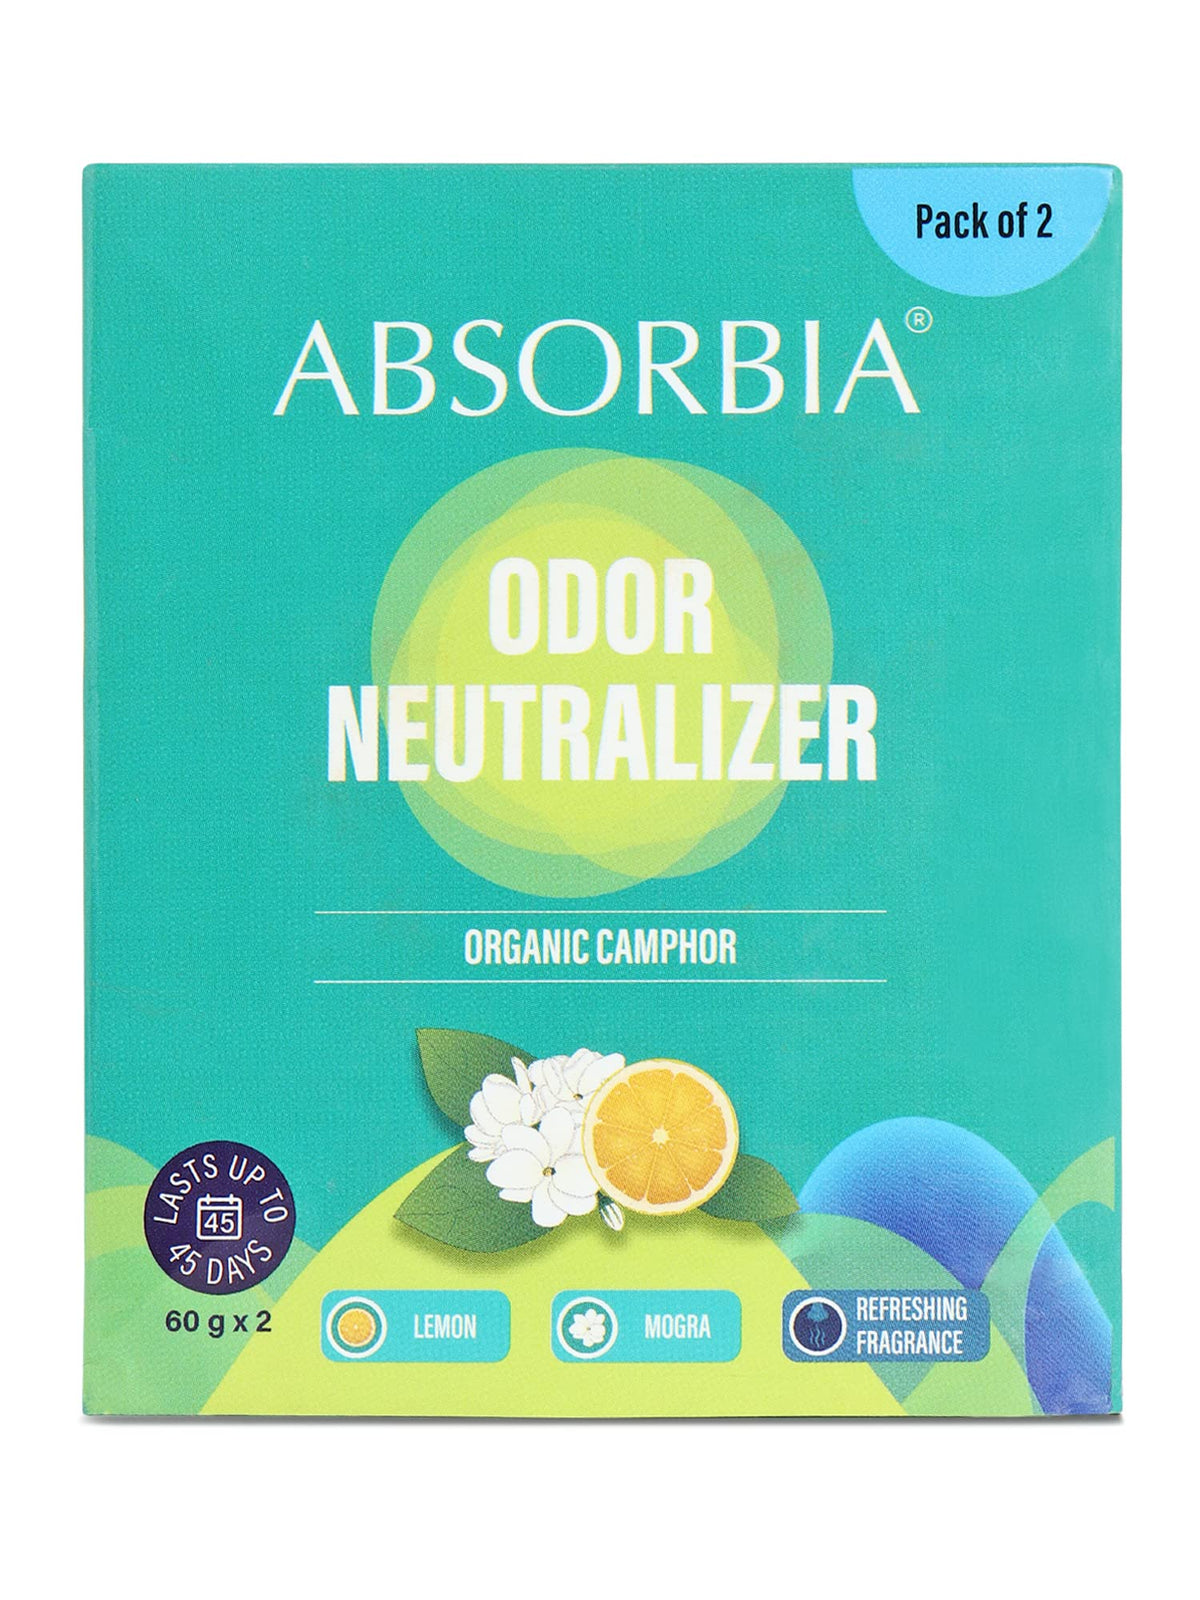 ABSORBIA Natural Camphor Unique Diamond shape for Equal Dispersion| 60g each Pack of 2 | with frag. Mogra and Lemon |For Room, Car and Air Freshener | helps repells bugs and insects